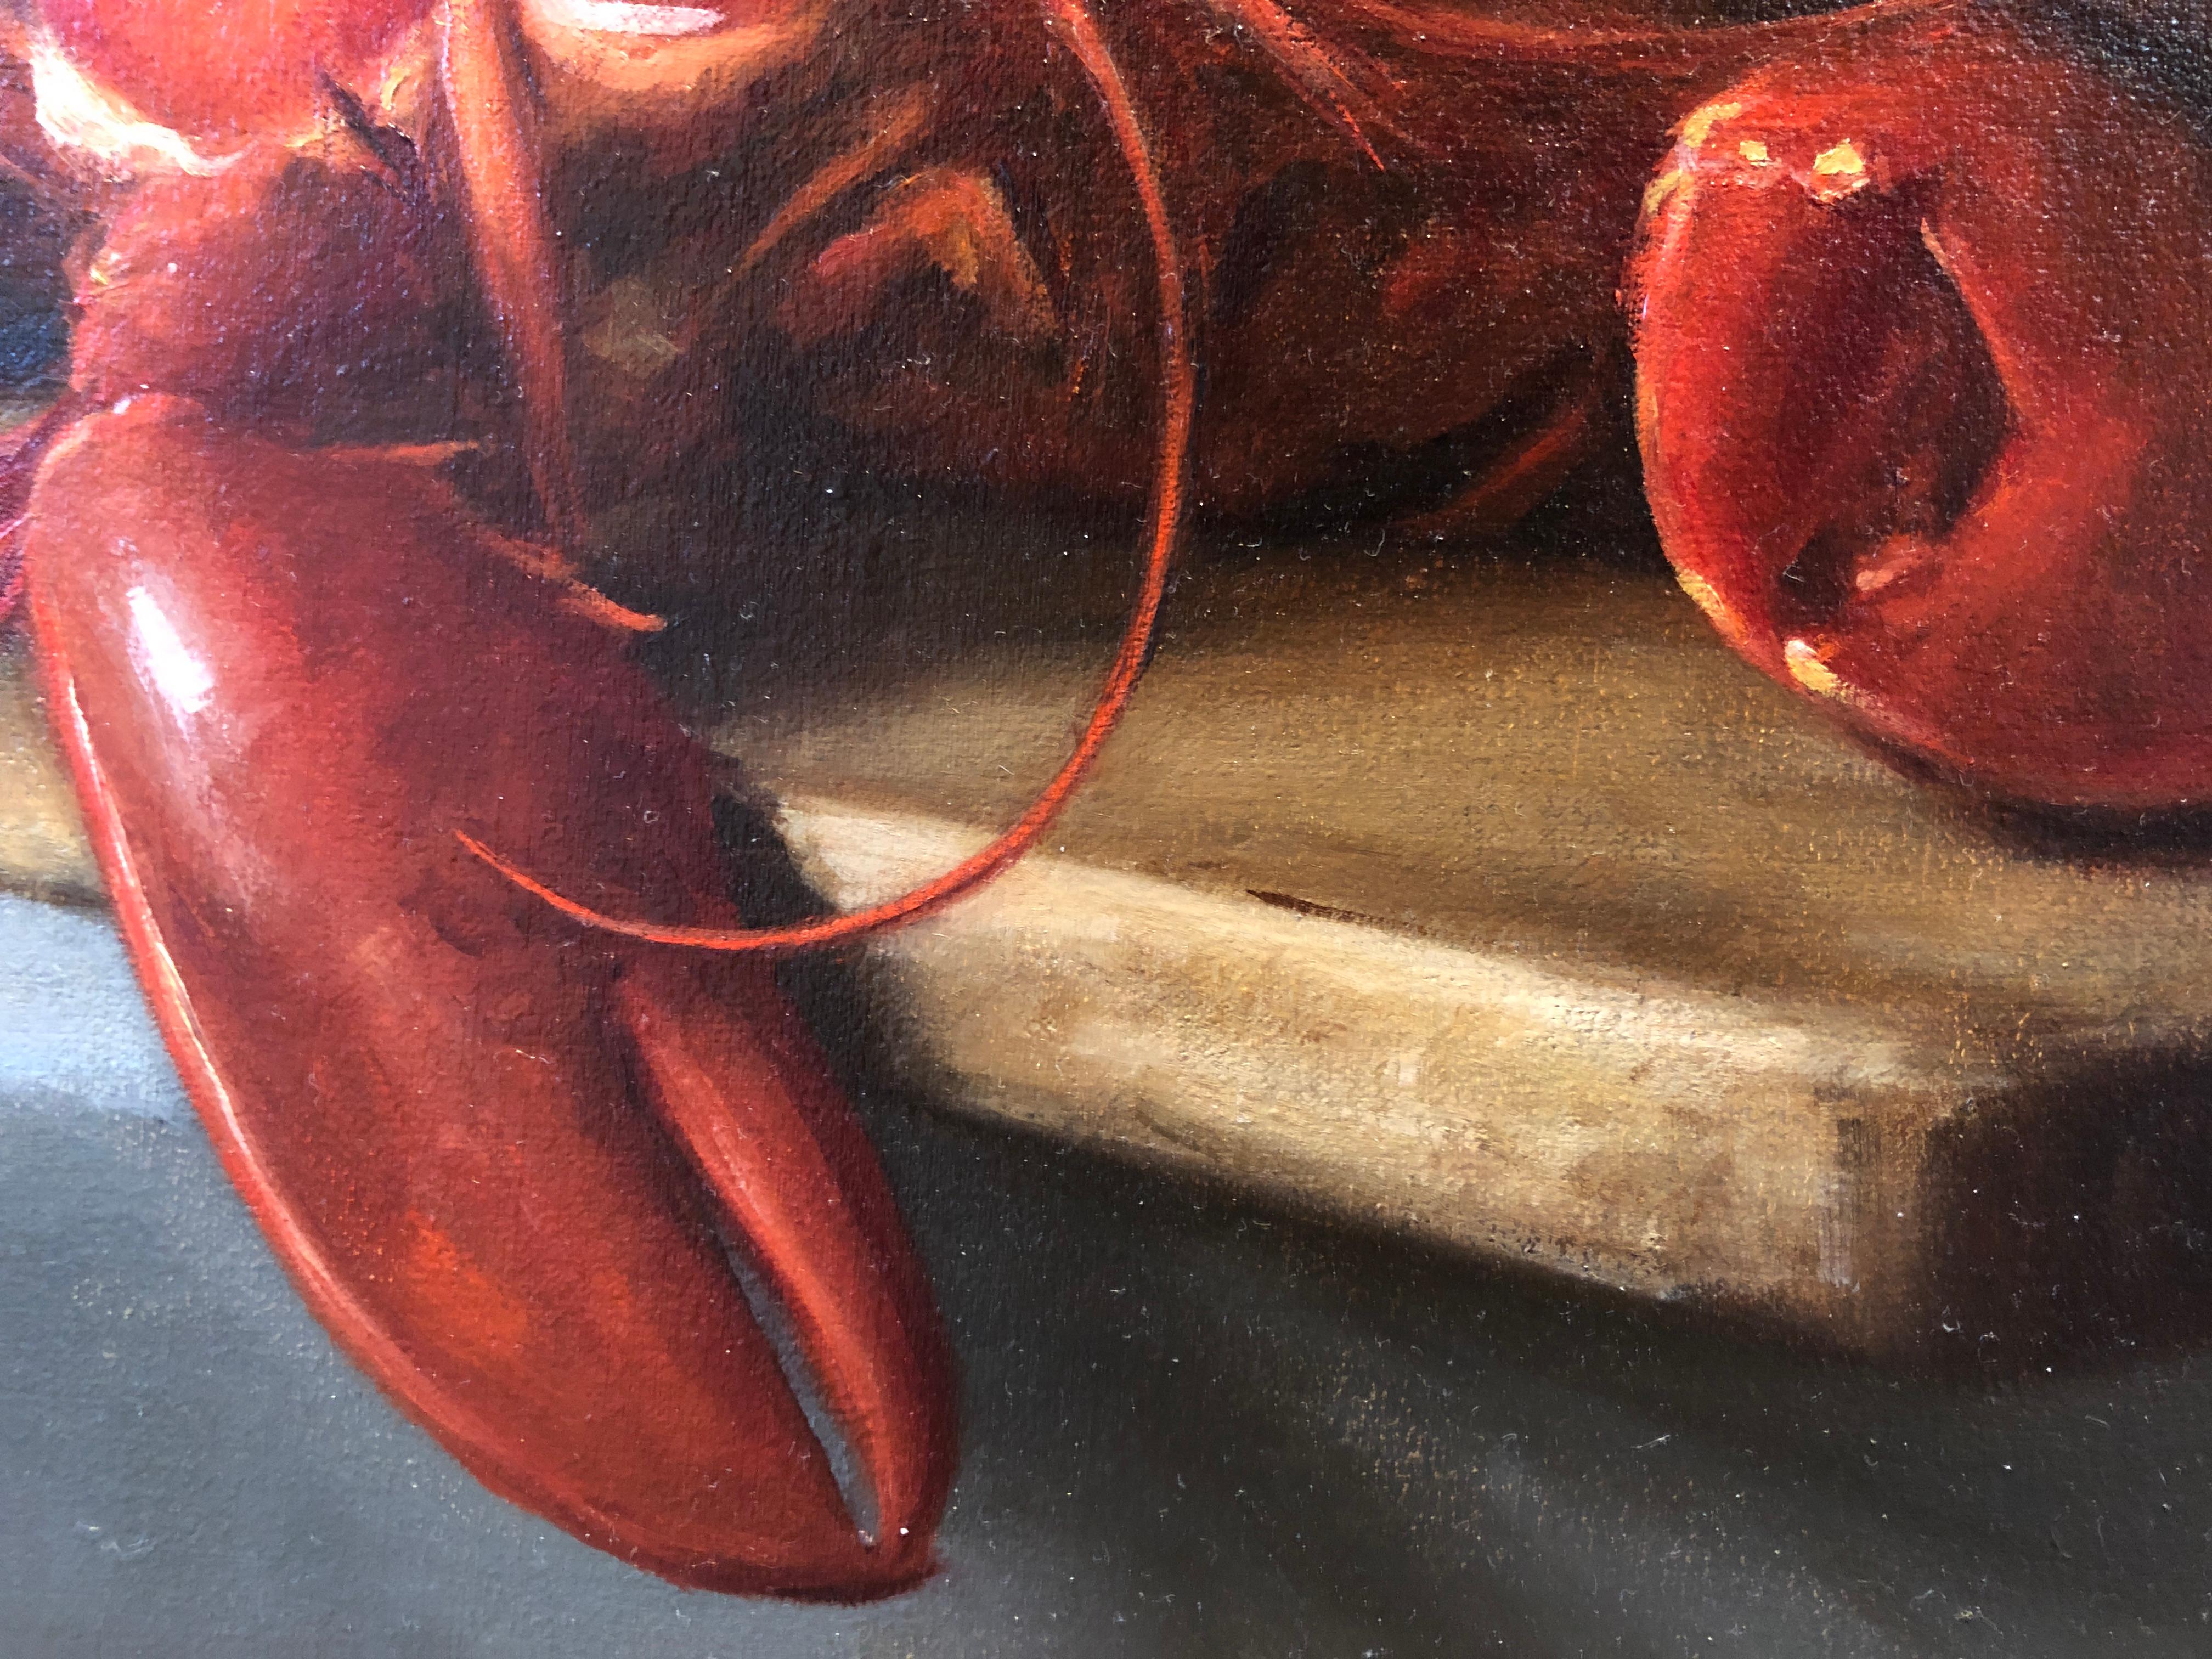 Painted from life in her studio, Sarah Lamb captures a bright red cooked lobster, garnished with a lemon wedge and a ramekin of butter. A large copper pot balances the composition with its voluptuous vertical form. Painted in the realistic style of